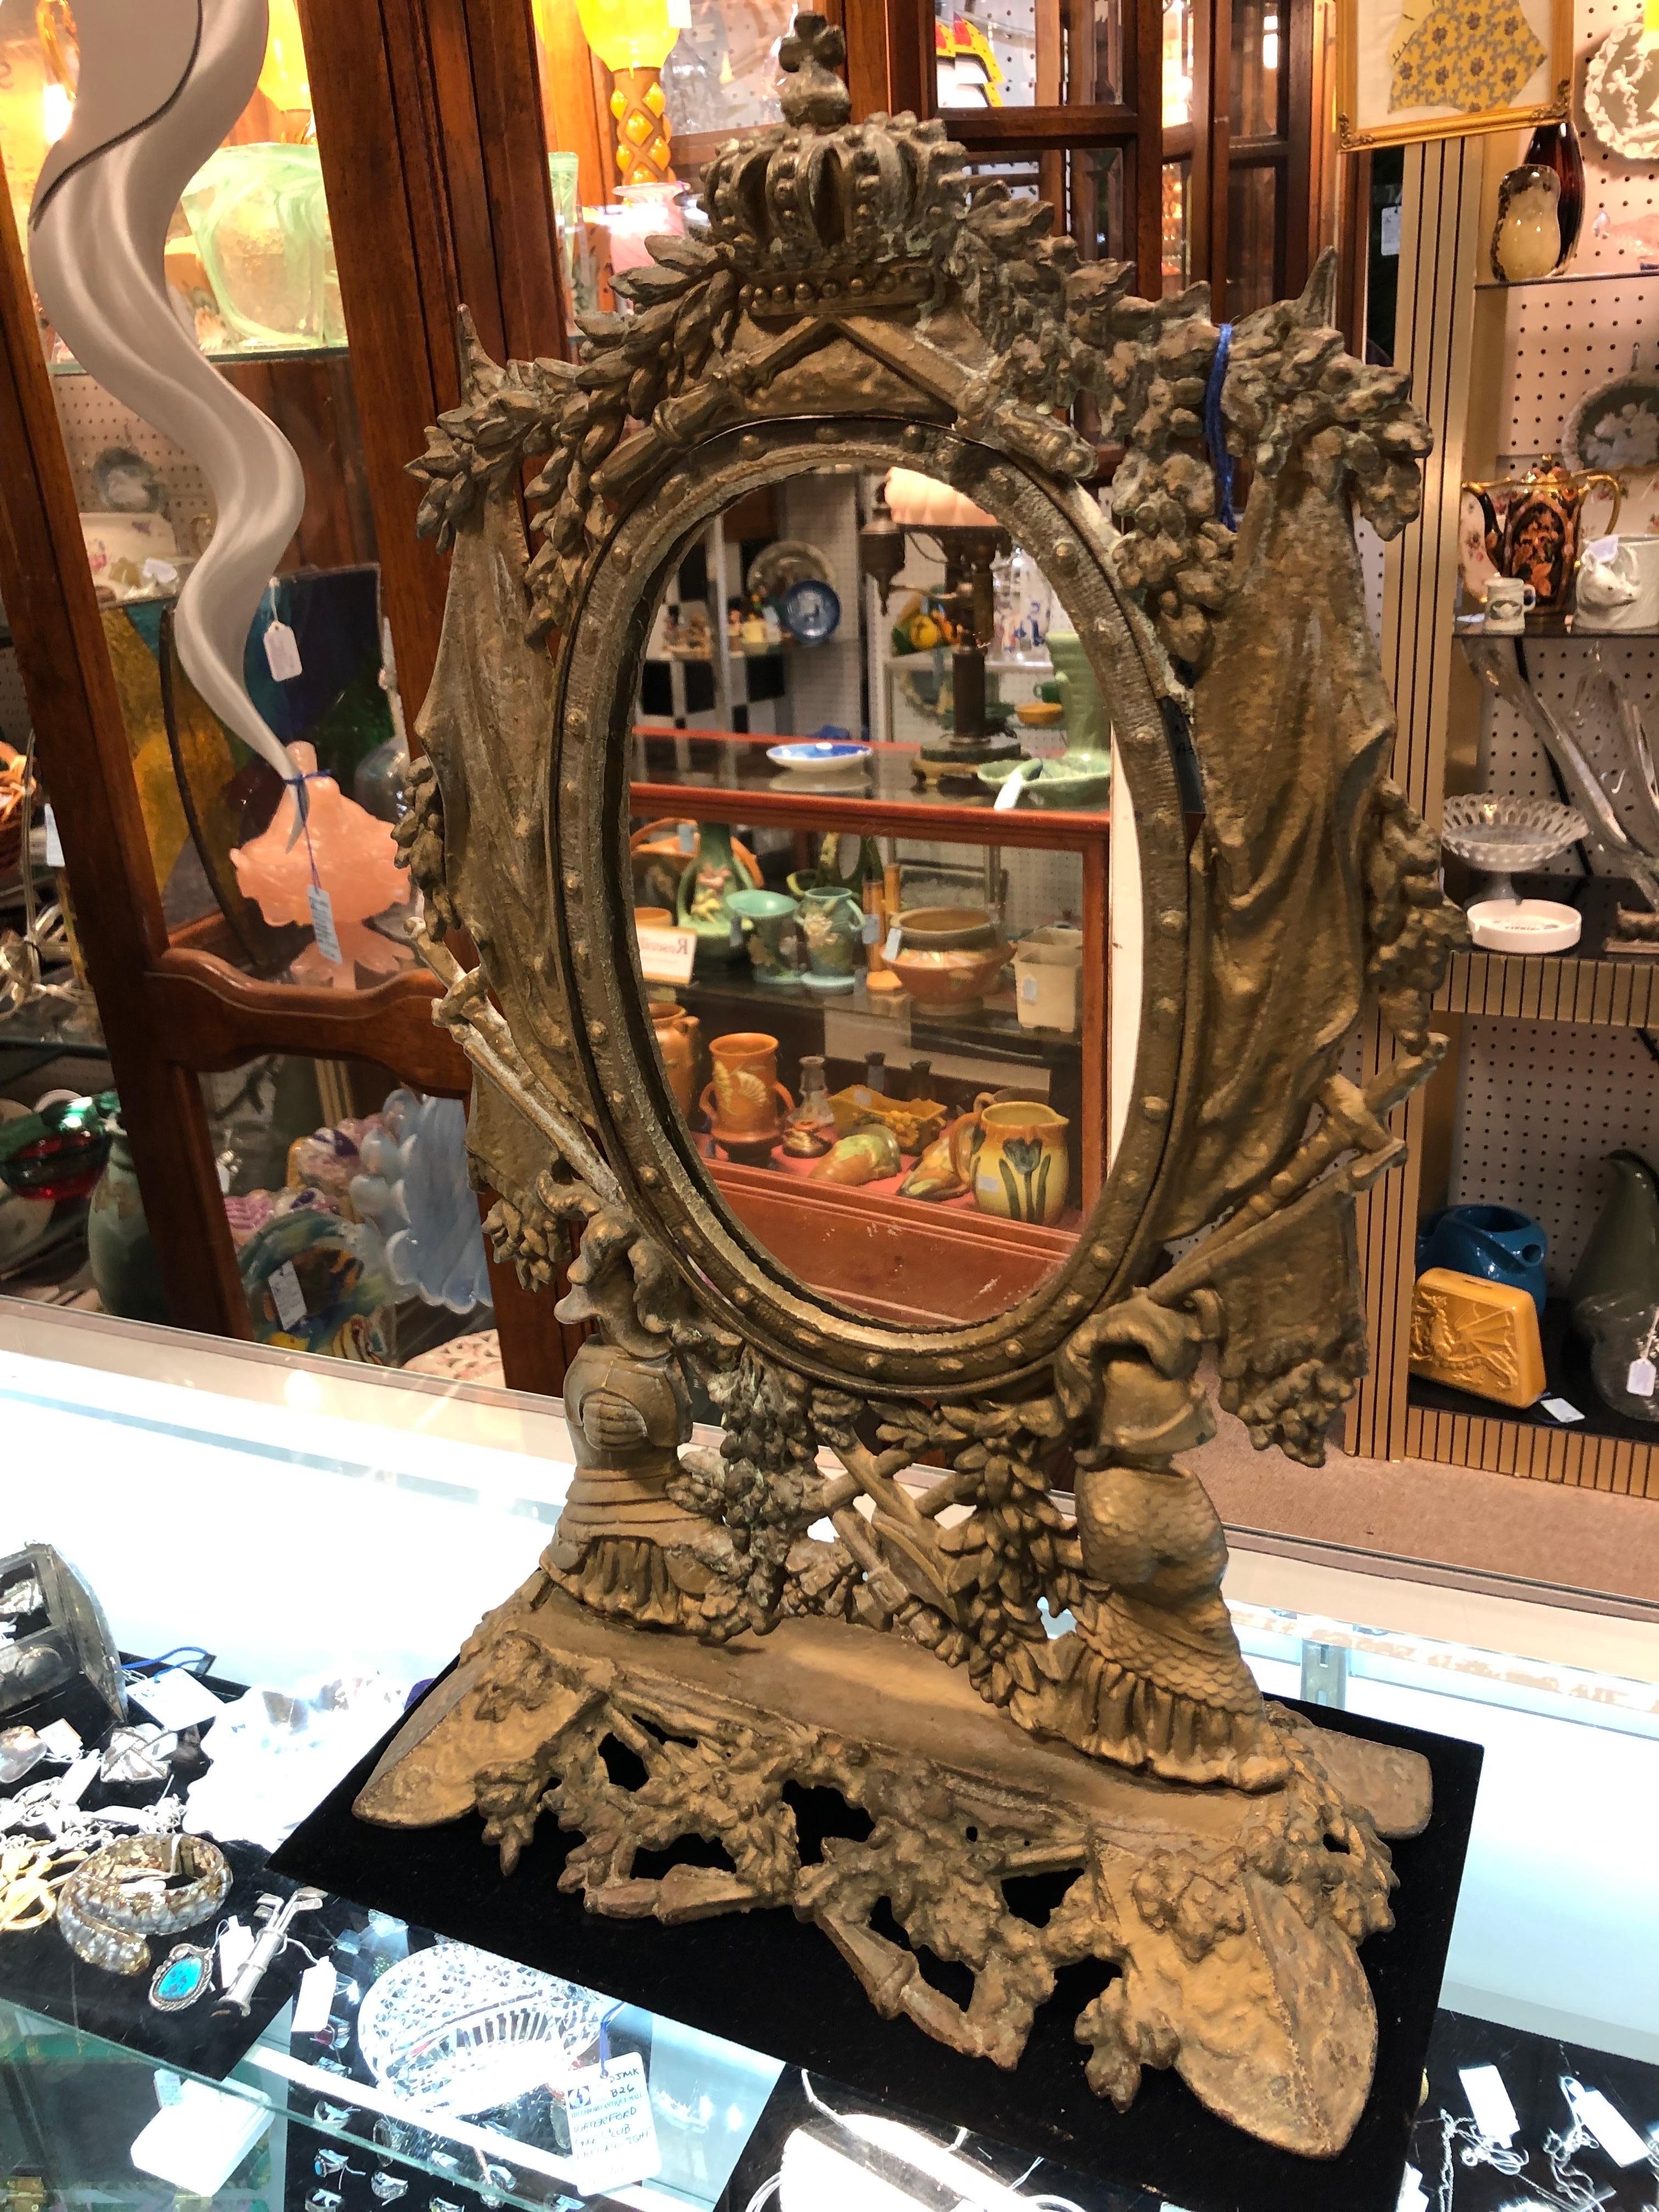 Brass Ornate Vanity Table Mirror on Stand.
Elaborate brass and gold finished mirror on stand.
Size: 13.5